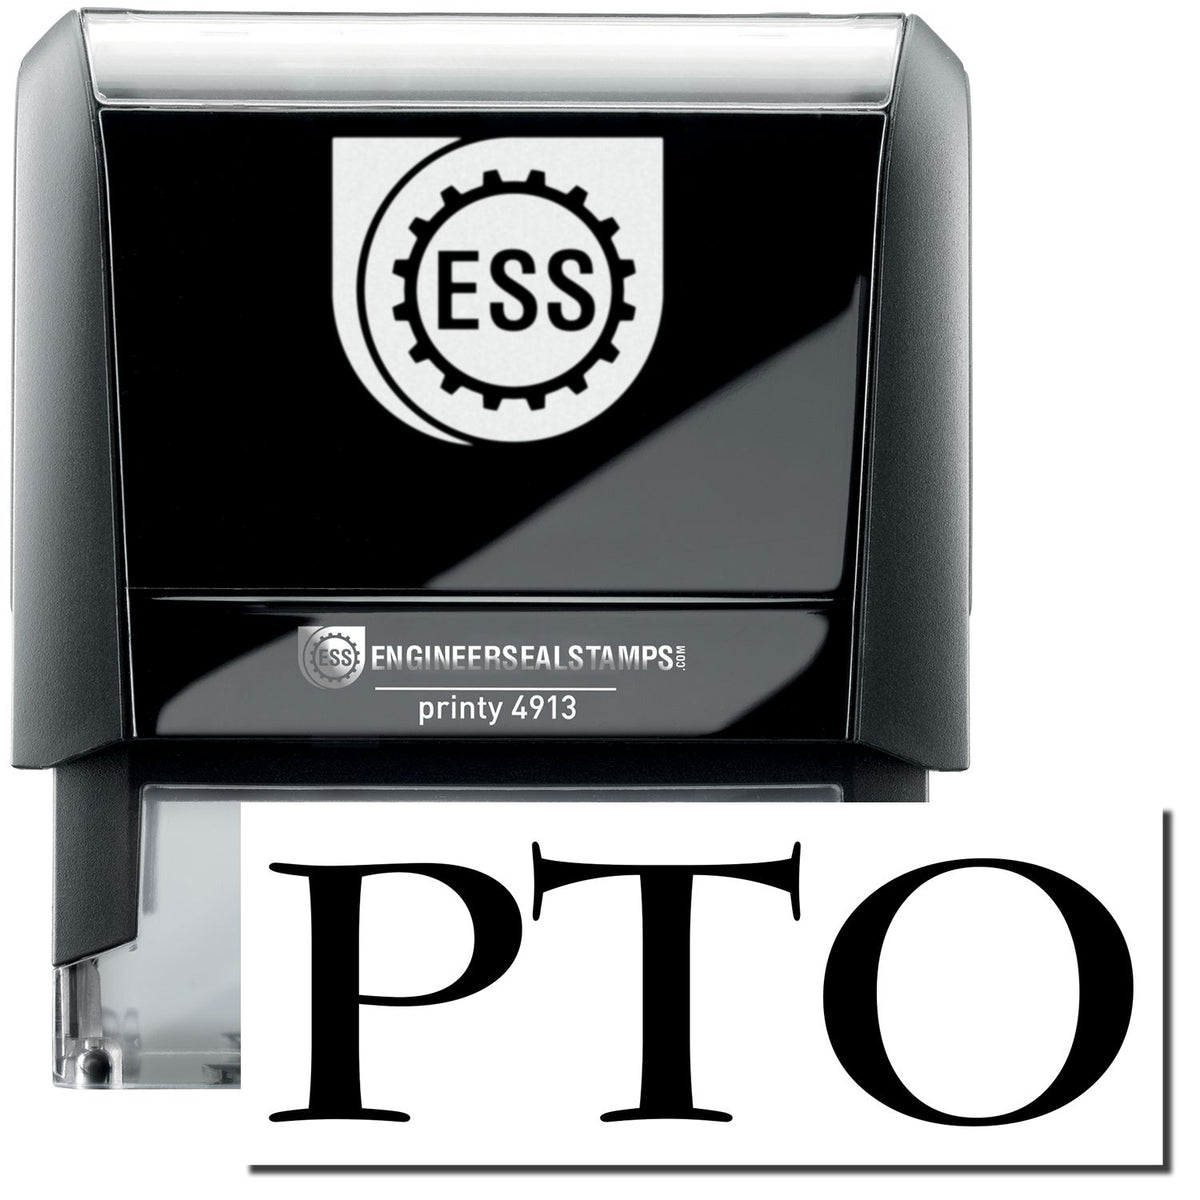 A self-inking stamp with a stamped image showing how the text &quot;PTO&quot; in a large bold font is displayed by it.